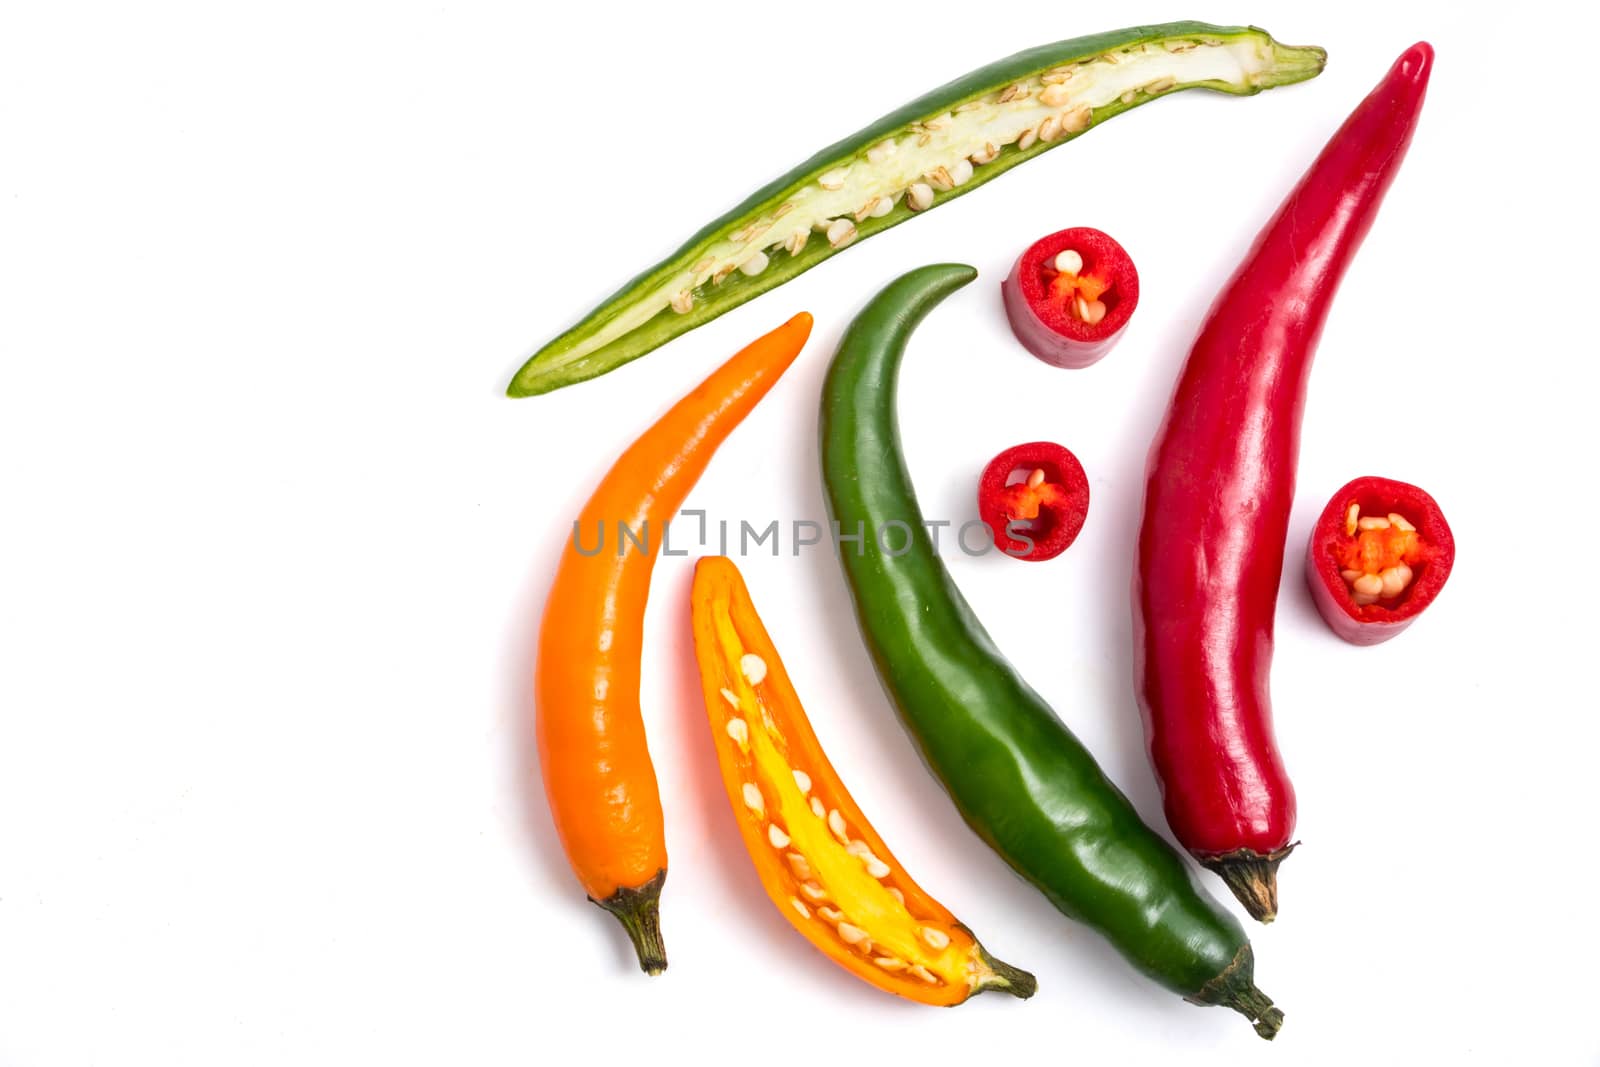 Colorful mix of chili pappers on white background.